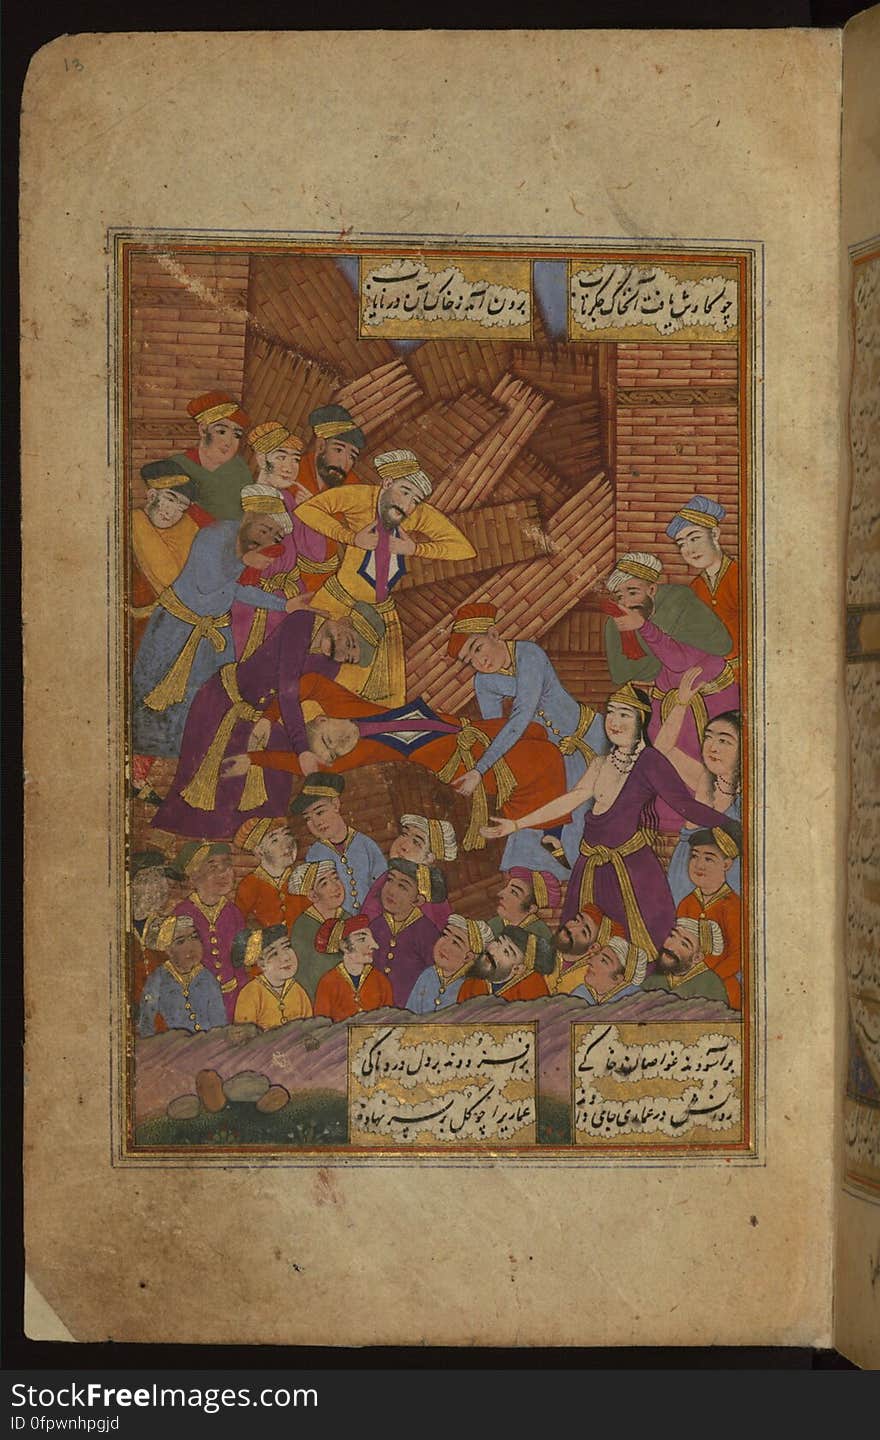 On the morning the young man and woman were to be wed, the bridegroom travels to the home of his beloved. On his way, he stops to rest in a mud building. As a result of heavy rains, the structure falls and buries the bridegroom and his companions alive. An elegantly calligraphed, illuminated and illustrated copy of the poem Sūz va gudāz &#x28;&#x27;Burning and melting&#x27;&#x29; by Nawʿī Khabūshānī &#x28;d.1019 AH /1610 CE&#x29; which recounts the love story of a Hindu girl who decides to burn herself on the pyre of her betrothed killed accidentally just before their marriage. The present codex was penned by Ibn Sayyid Murād al-Ḥusaynī and illustrated by Muḥammad ʿAlī Mashhadī in 1068 AH / 1657 CE. See this manuscript page by page at the Walters Art Museum website: art.thewalters.org/viewwoa.aspx?id=30391. On the morning the young man and woman were to be wed, the bridegroom travels to the home of his beloved. On his way, he stops to rest in a mud building. As a result of heavy rains, the structure falls and buries the bridegroom and his companions alive. An elegantly calligraphed, illuminated and illustrated copy of the poem Sūz va gudāz &#x28;&#x27;Burning and melting&#x27;&#x29; by Nawʿī Khabūshānī &#x28;d.1019 AH /1610 CE&#x29; which recounts the love story of a Hindu girl who decides to burn herself on the pyre of her betrothed killed accidentally just before their marriage. The present codex was penned by Ibn Sayyid Murād al-Ḥusaynī and illustrated by Muḥammad ʿAlī Mashhadī in 1068 AH / 1657 CE. See this manuscript page by page at the Walters Art Museum website: art.thewalters.org/viewwoa.aspx?id=30391